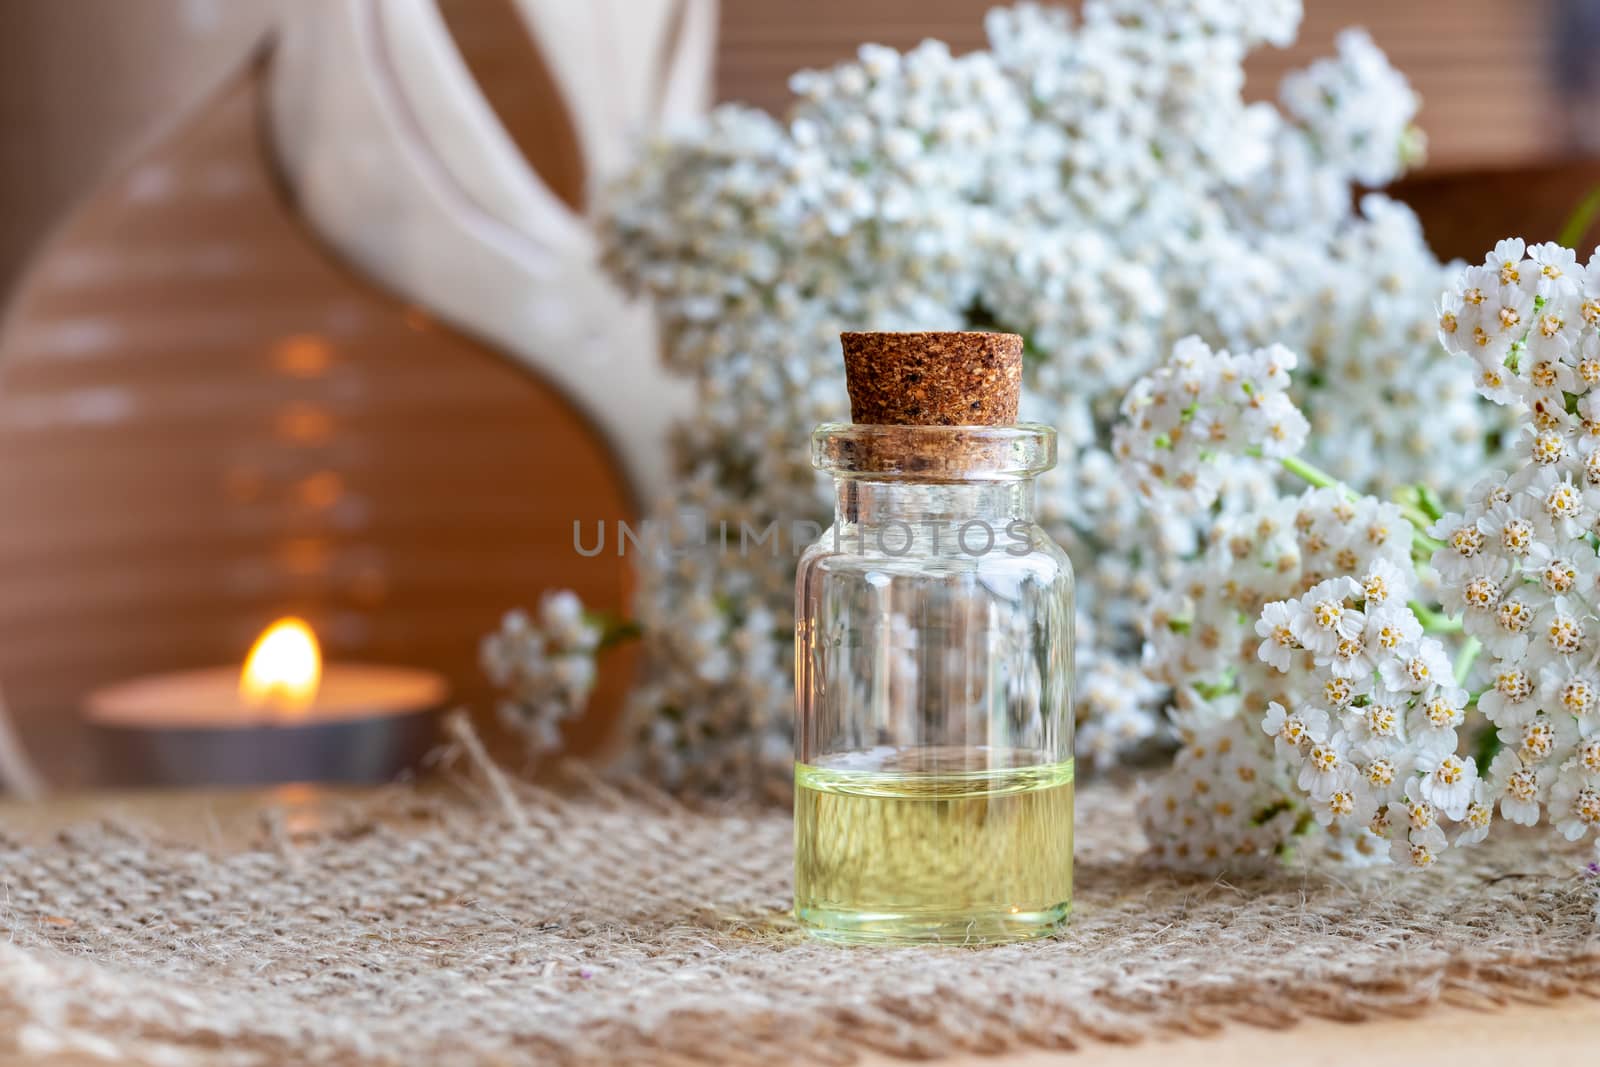 A bottle of essential oil with fresh blooming yarrow twigs